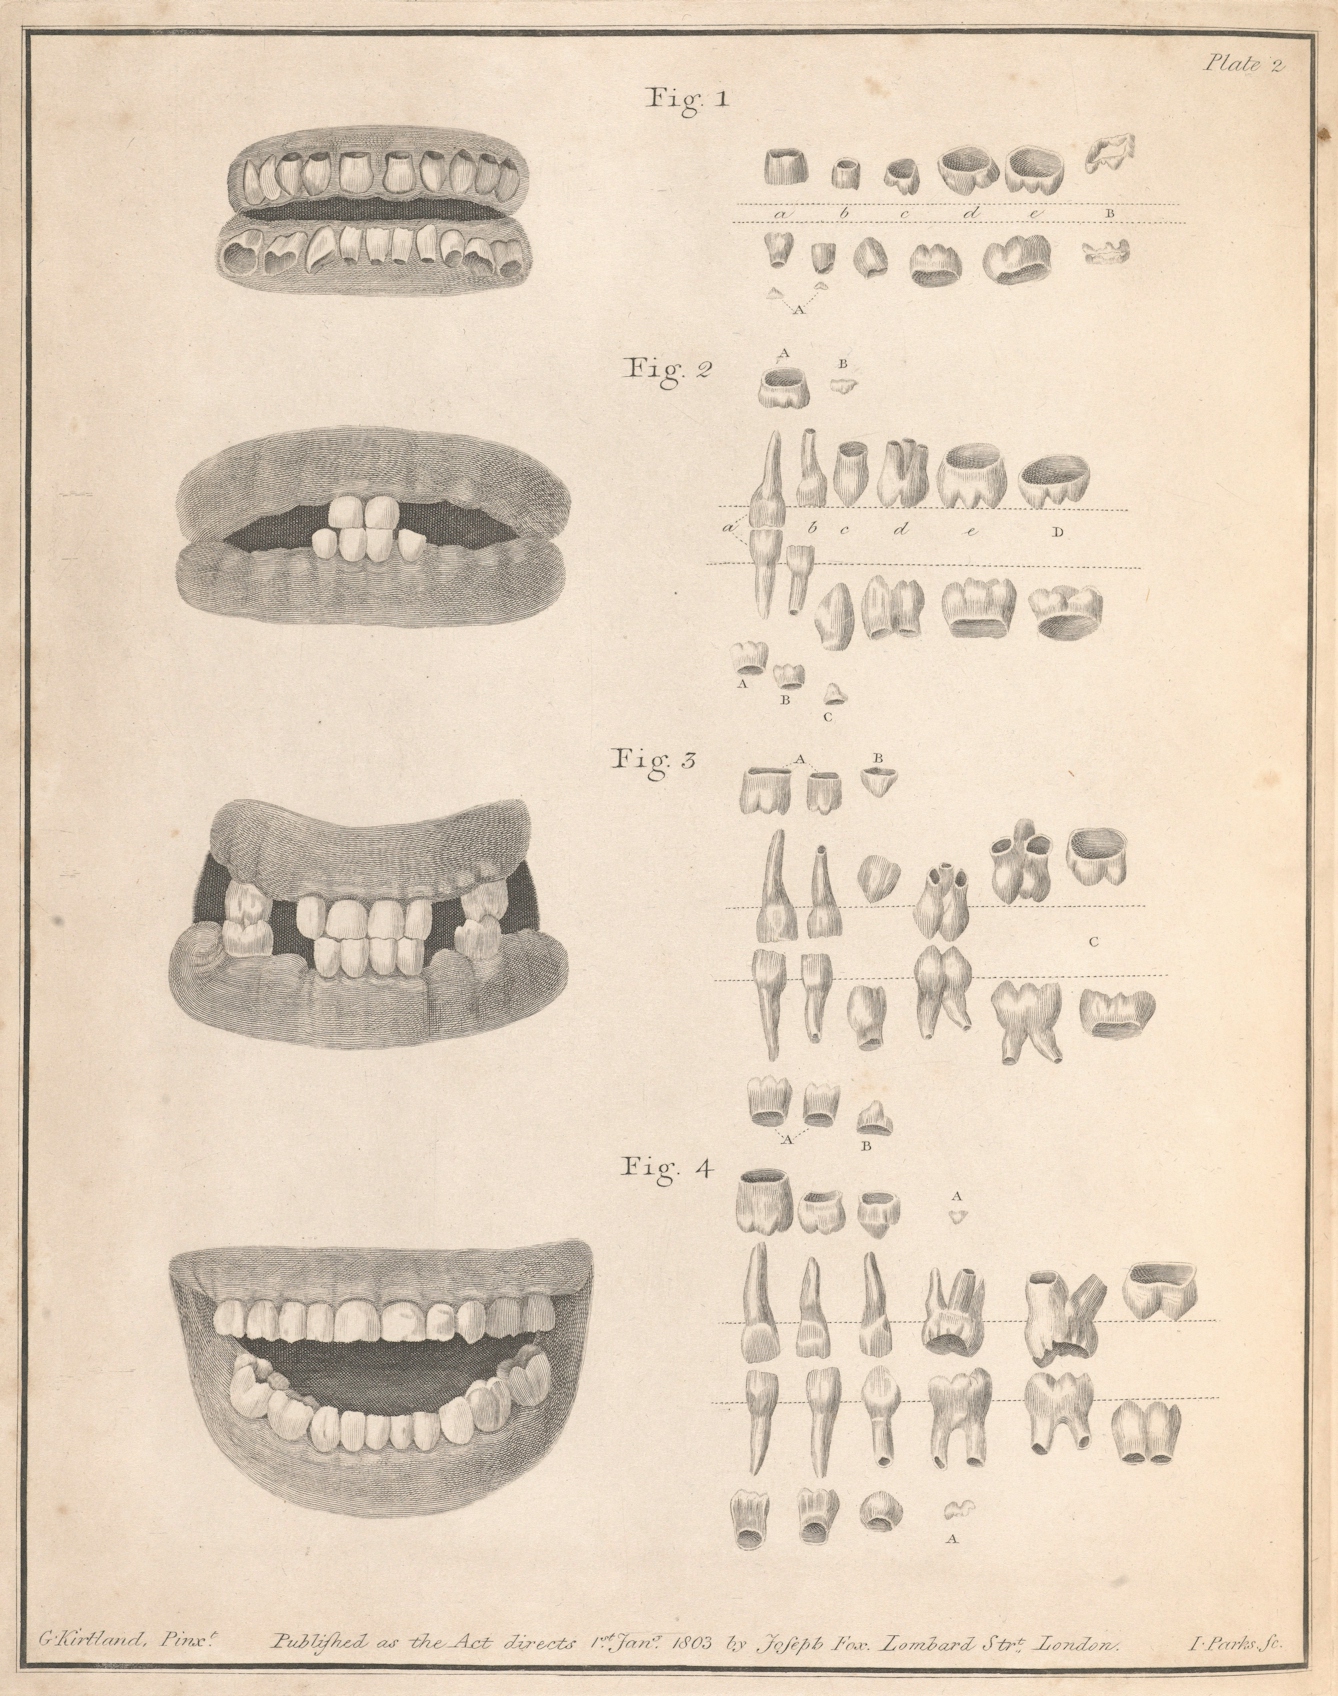 Copper-plate etching showing human teeth at four different ages.